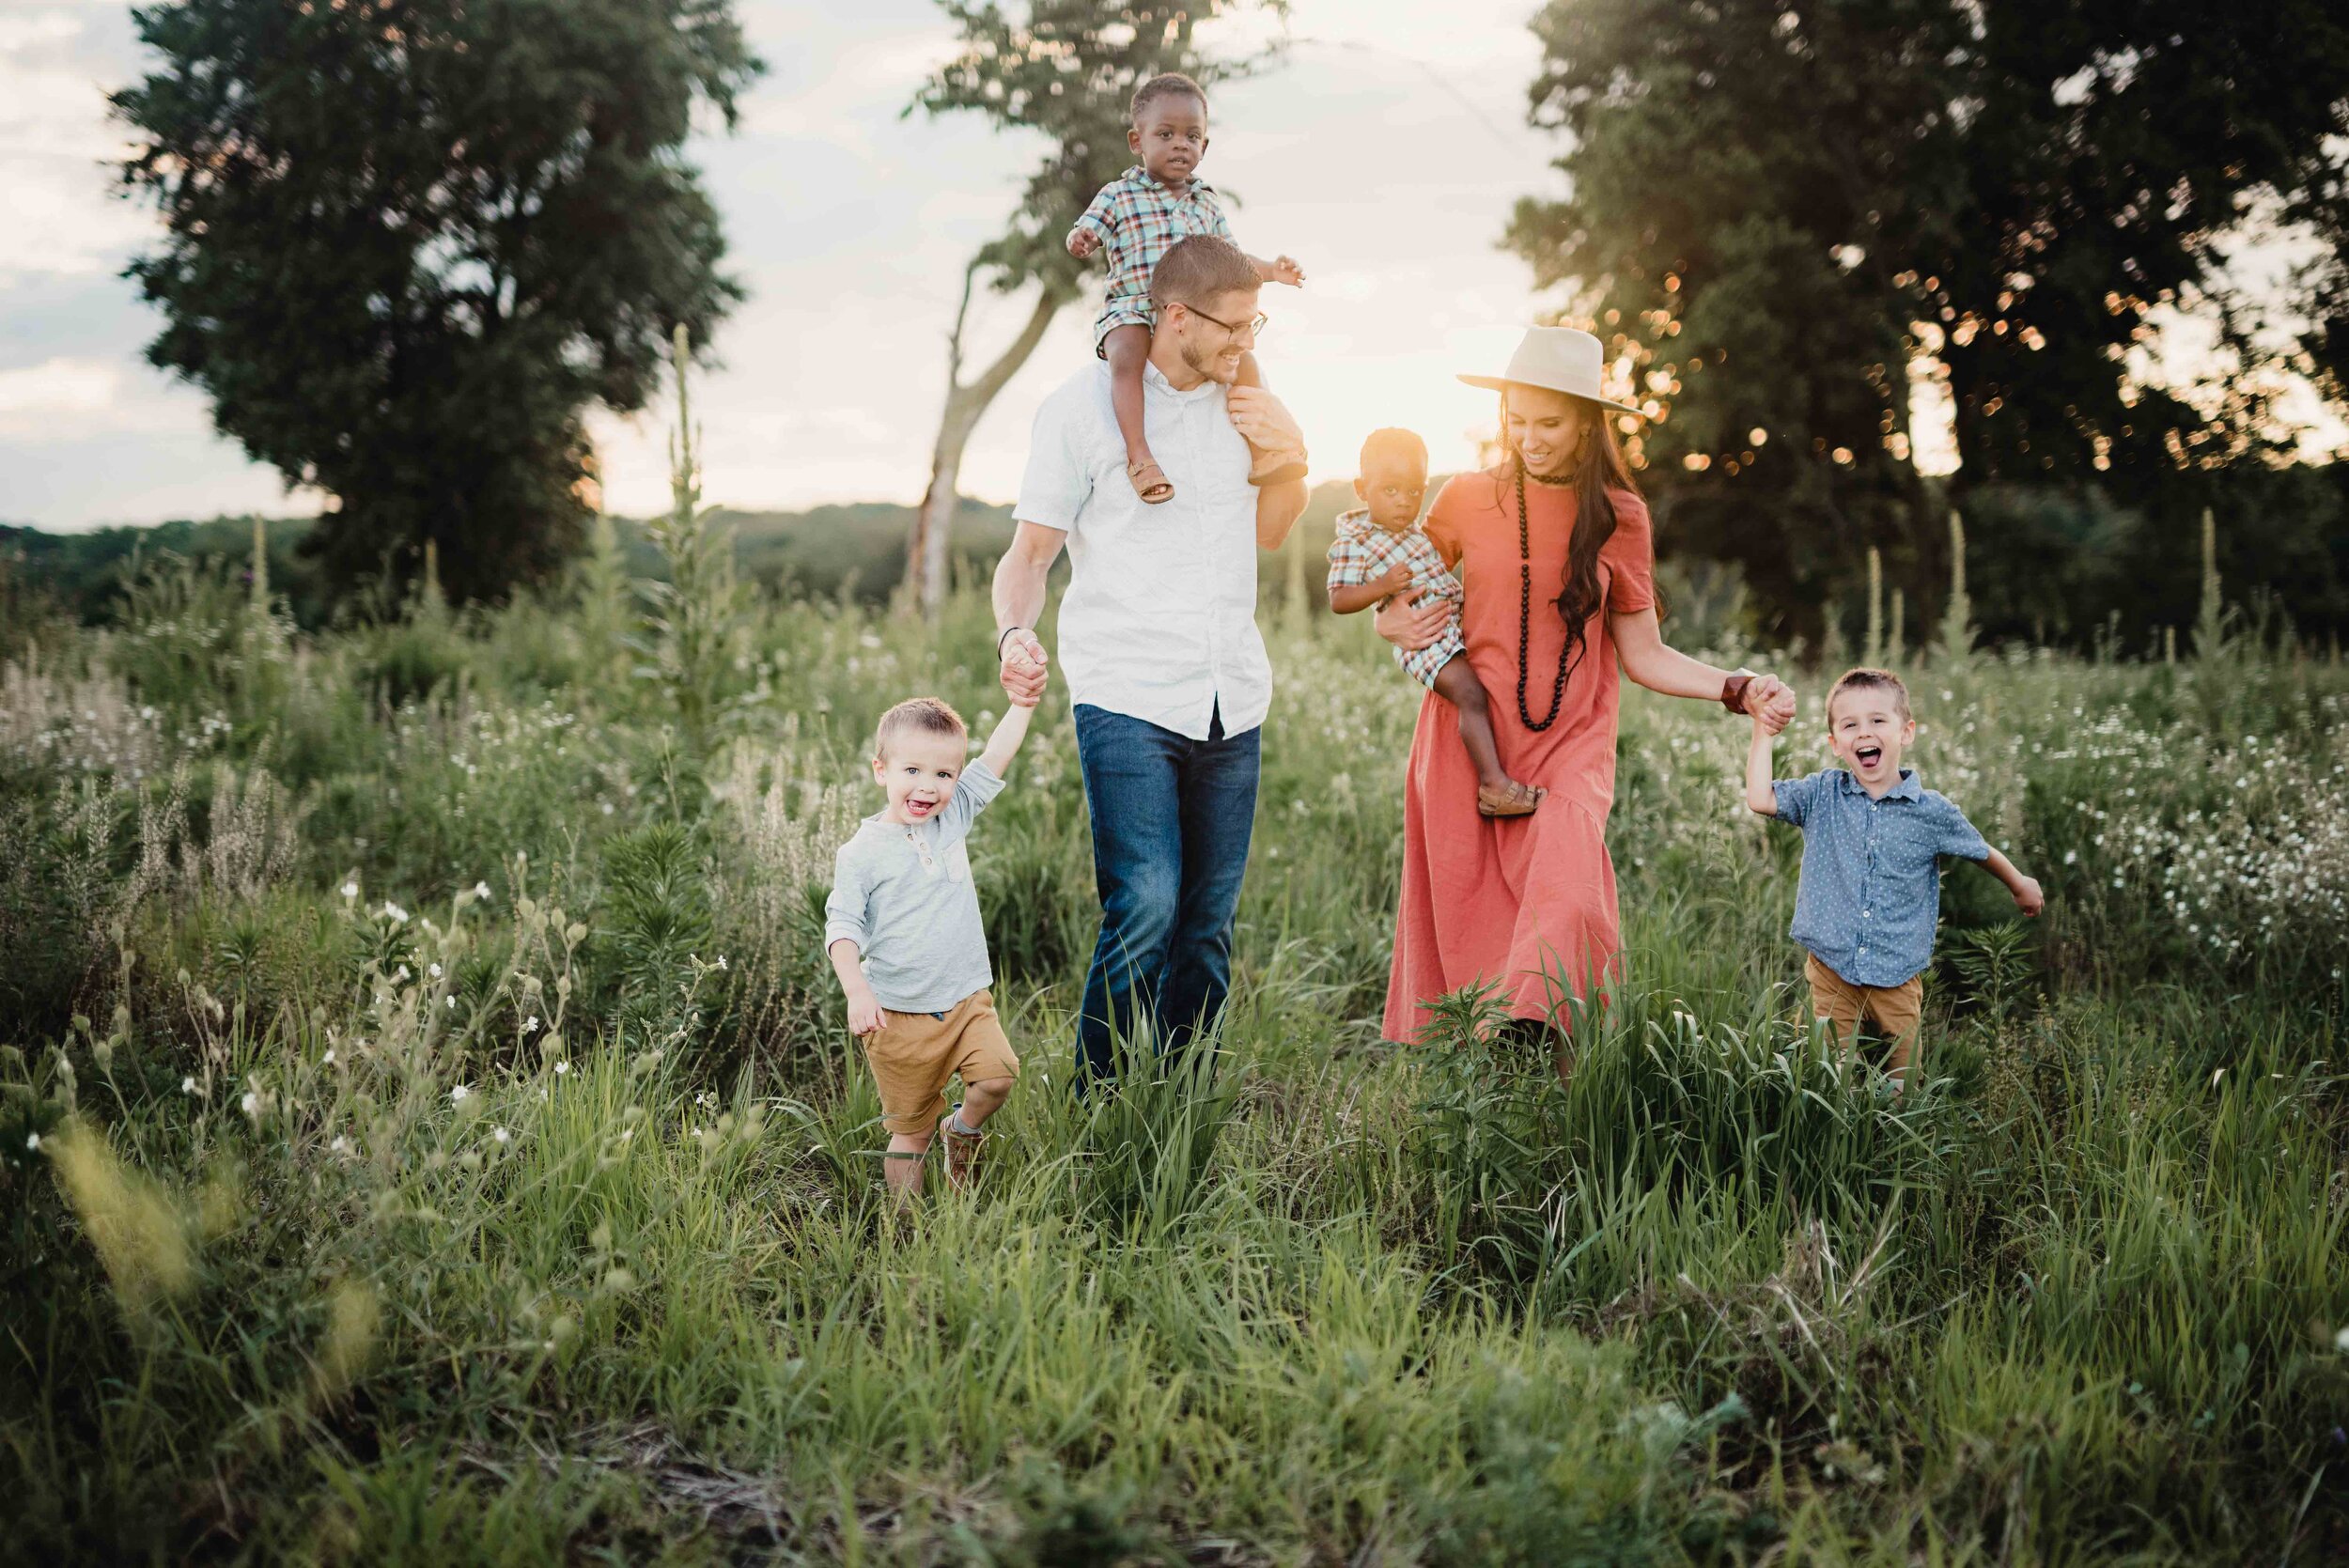 What I love about this family’s outfits is the mom’s dress has a gorgeous pattern that draws in colors from her daughter’s dresses. The daughters are in different complimenting dresses and dad is in the perfect light blue button down shirt to tie it…